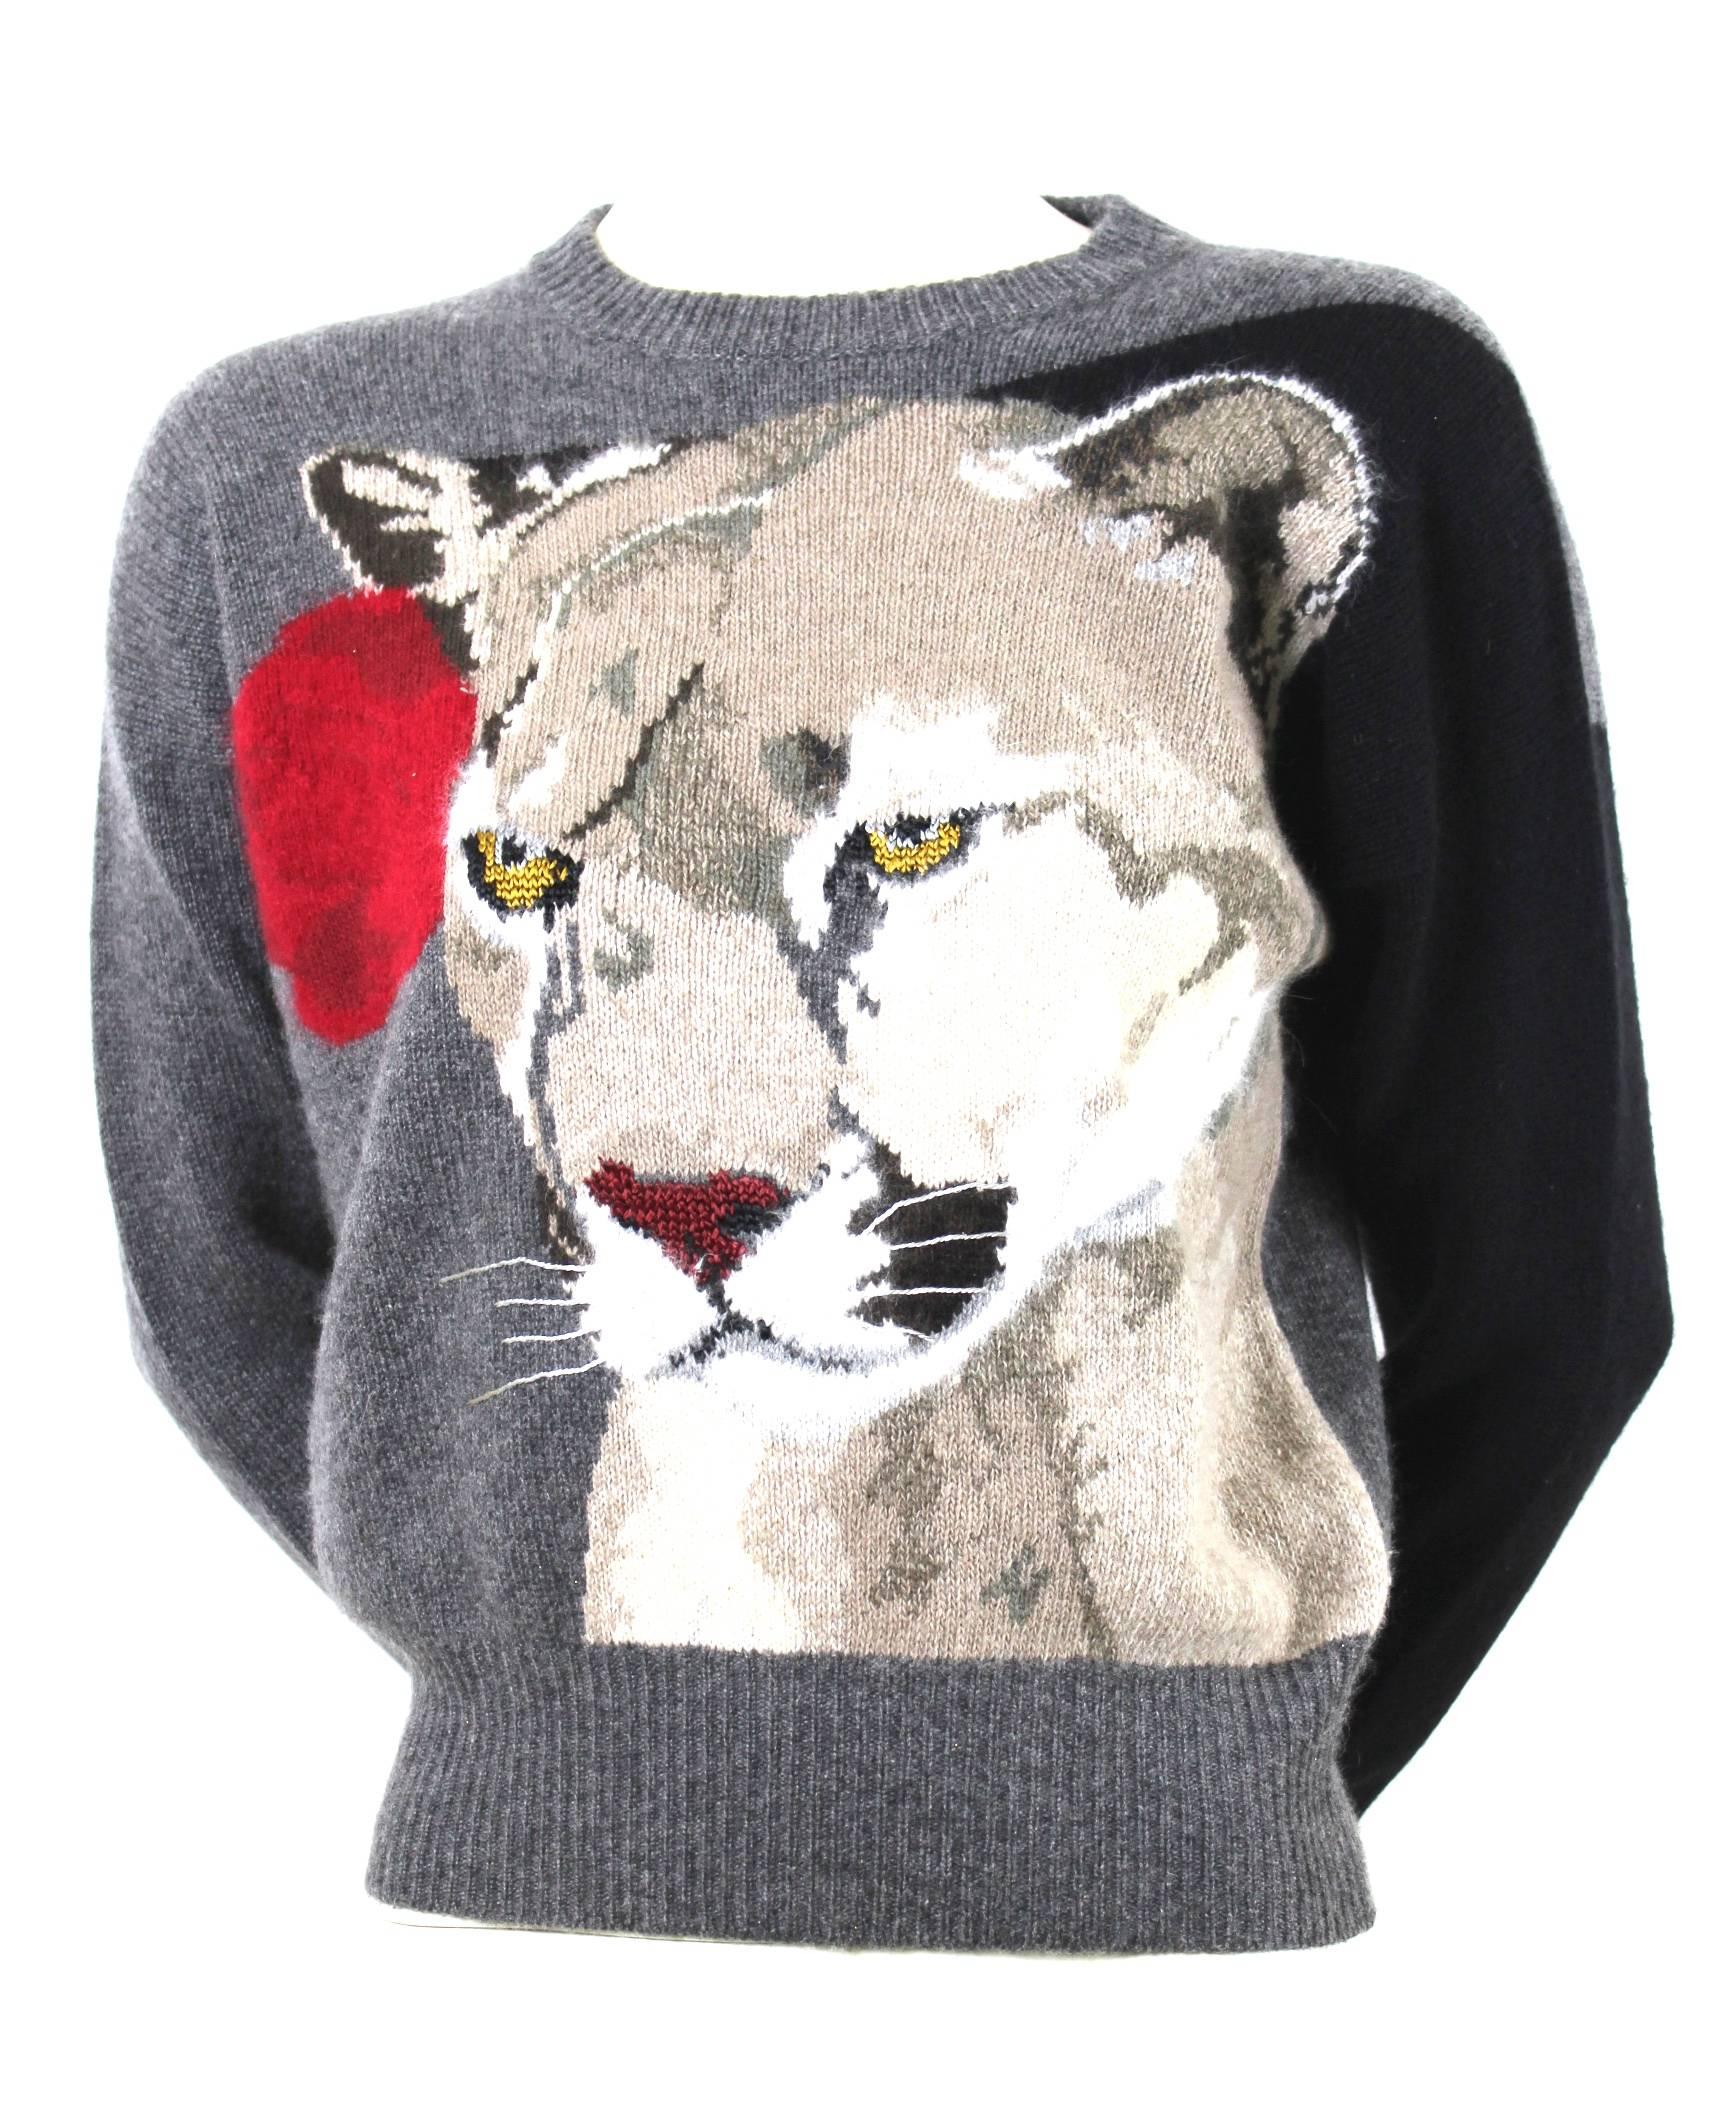 Krizia Maglia Cashmere Animal Series Sweater
Made in Italy
Size 38